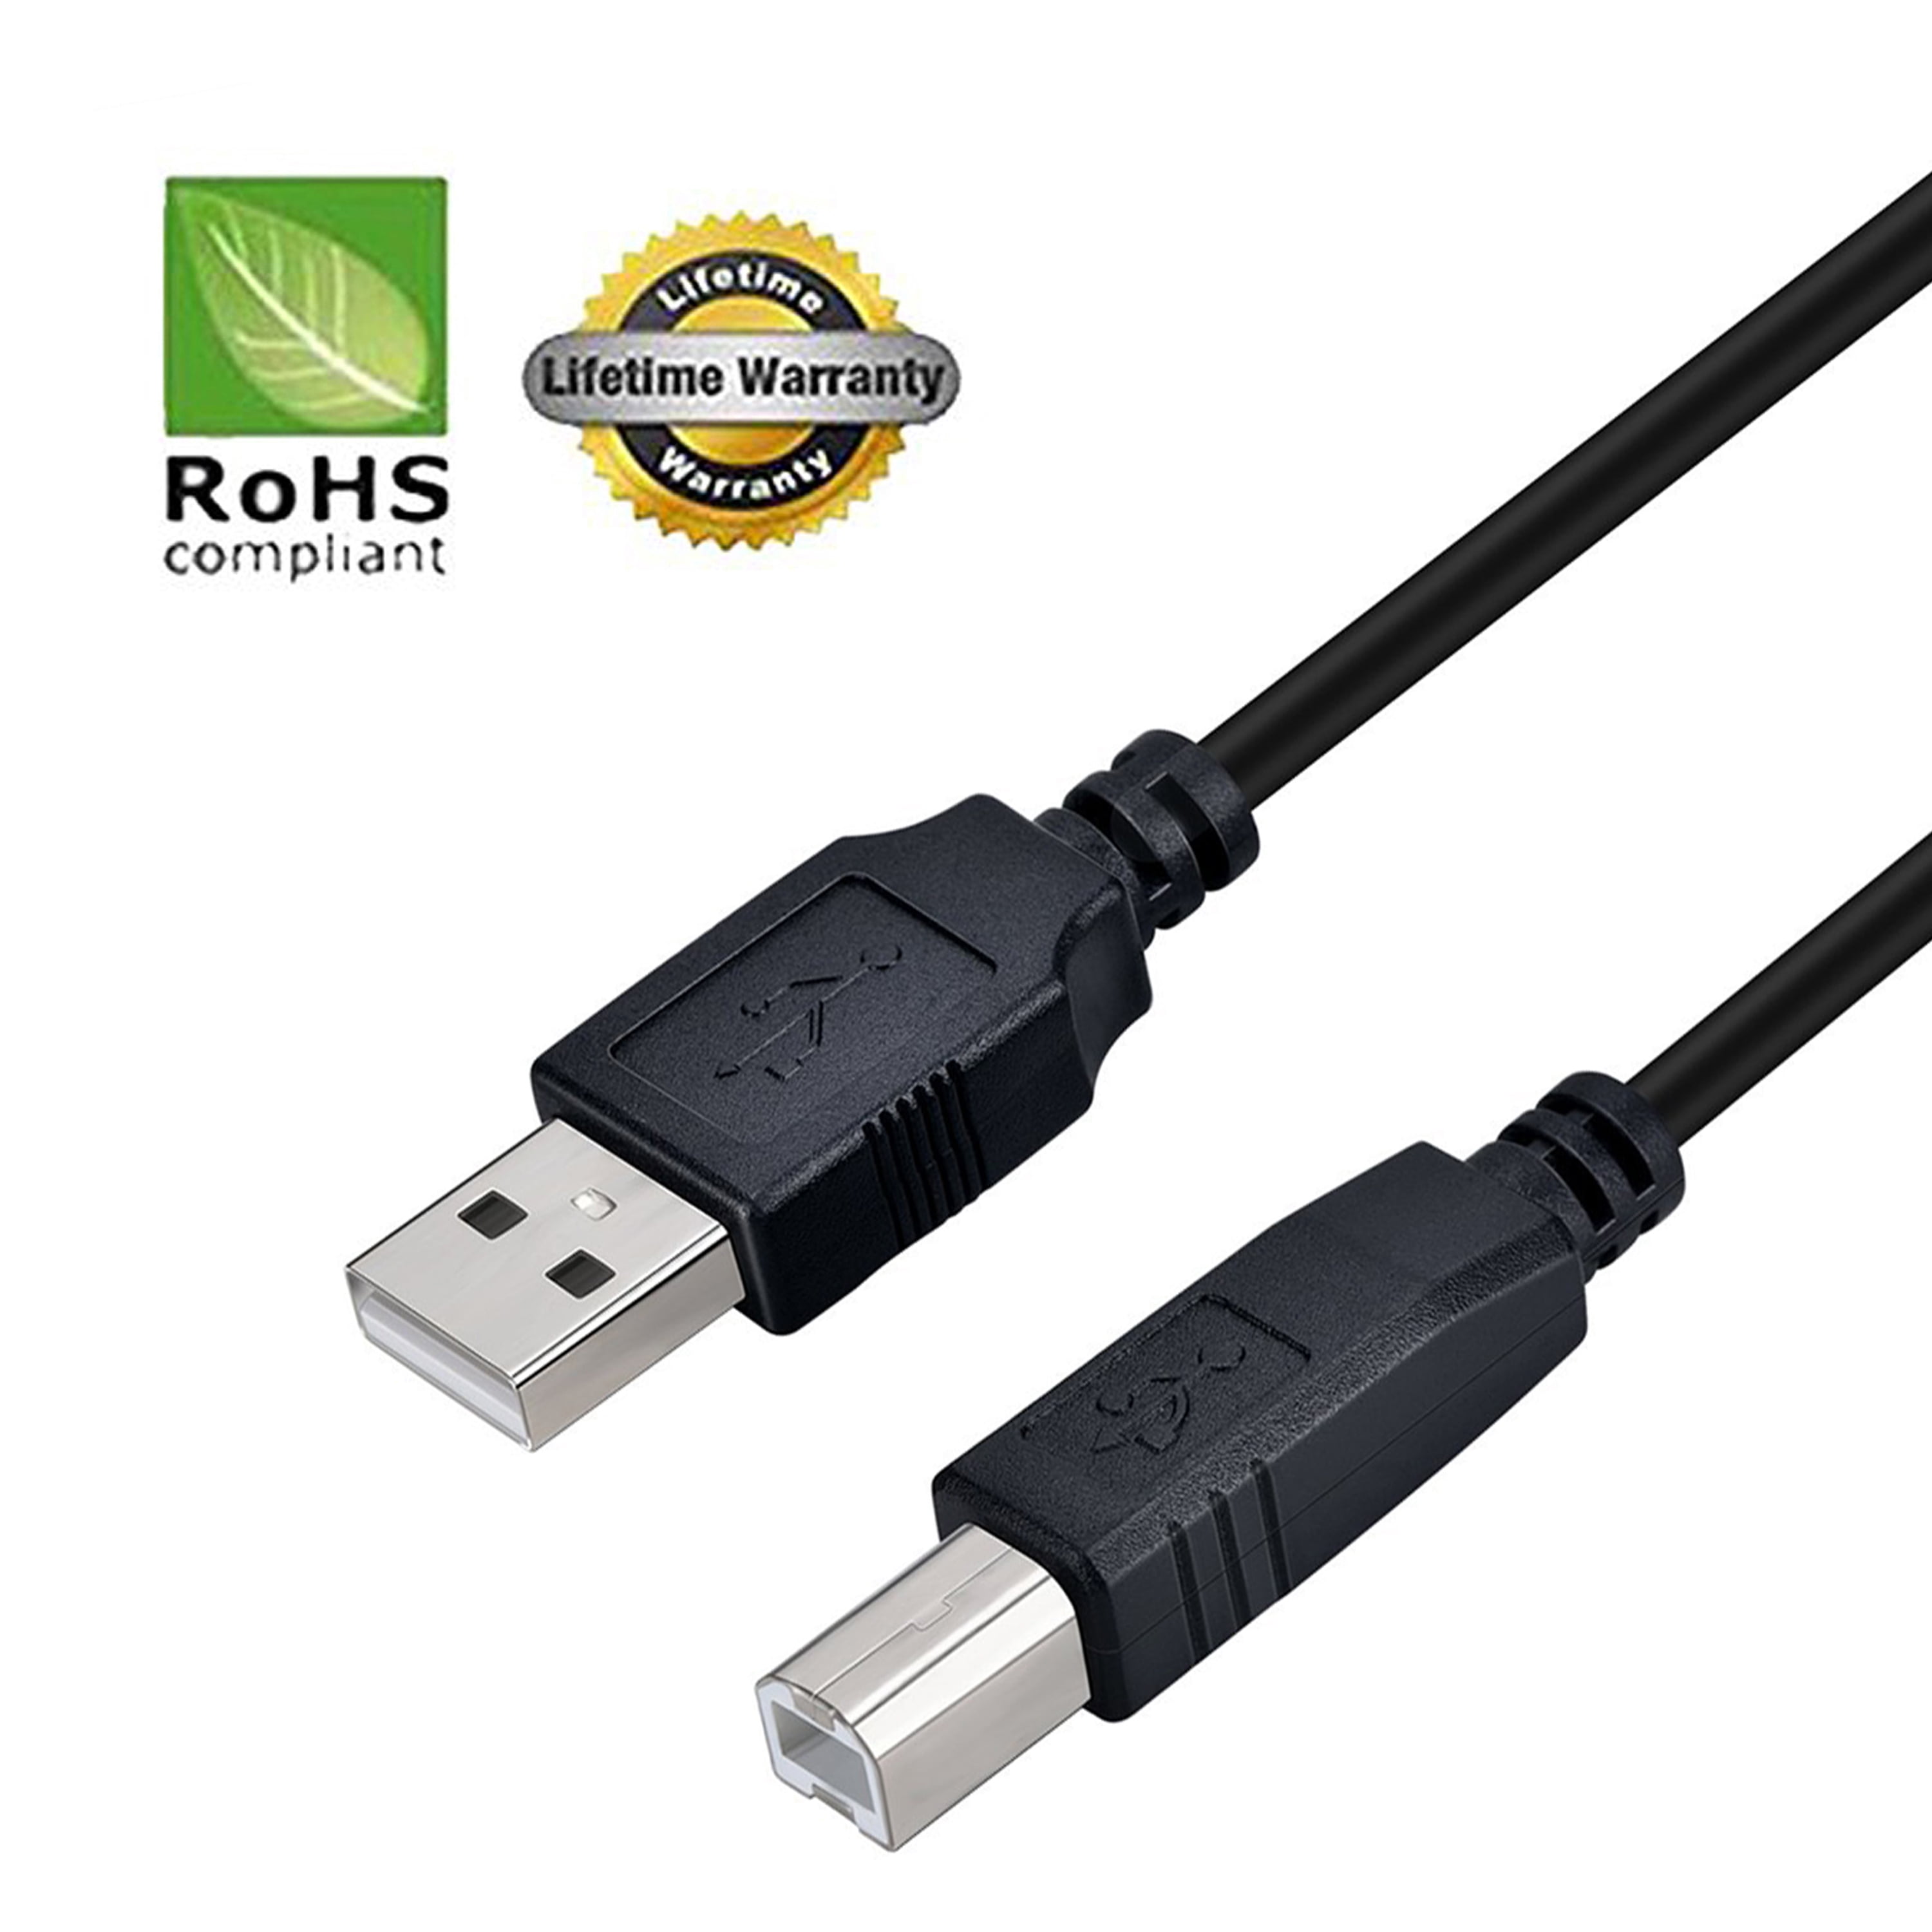 passage Let at ske smid væk USB 2.0 Cable - A-Male to B-Male for MakerBot Replicator Mini Compact 3D  Printer (Specific Models Only) - 10 FT /BLACK - Walmart.com